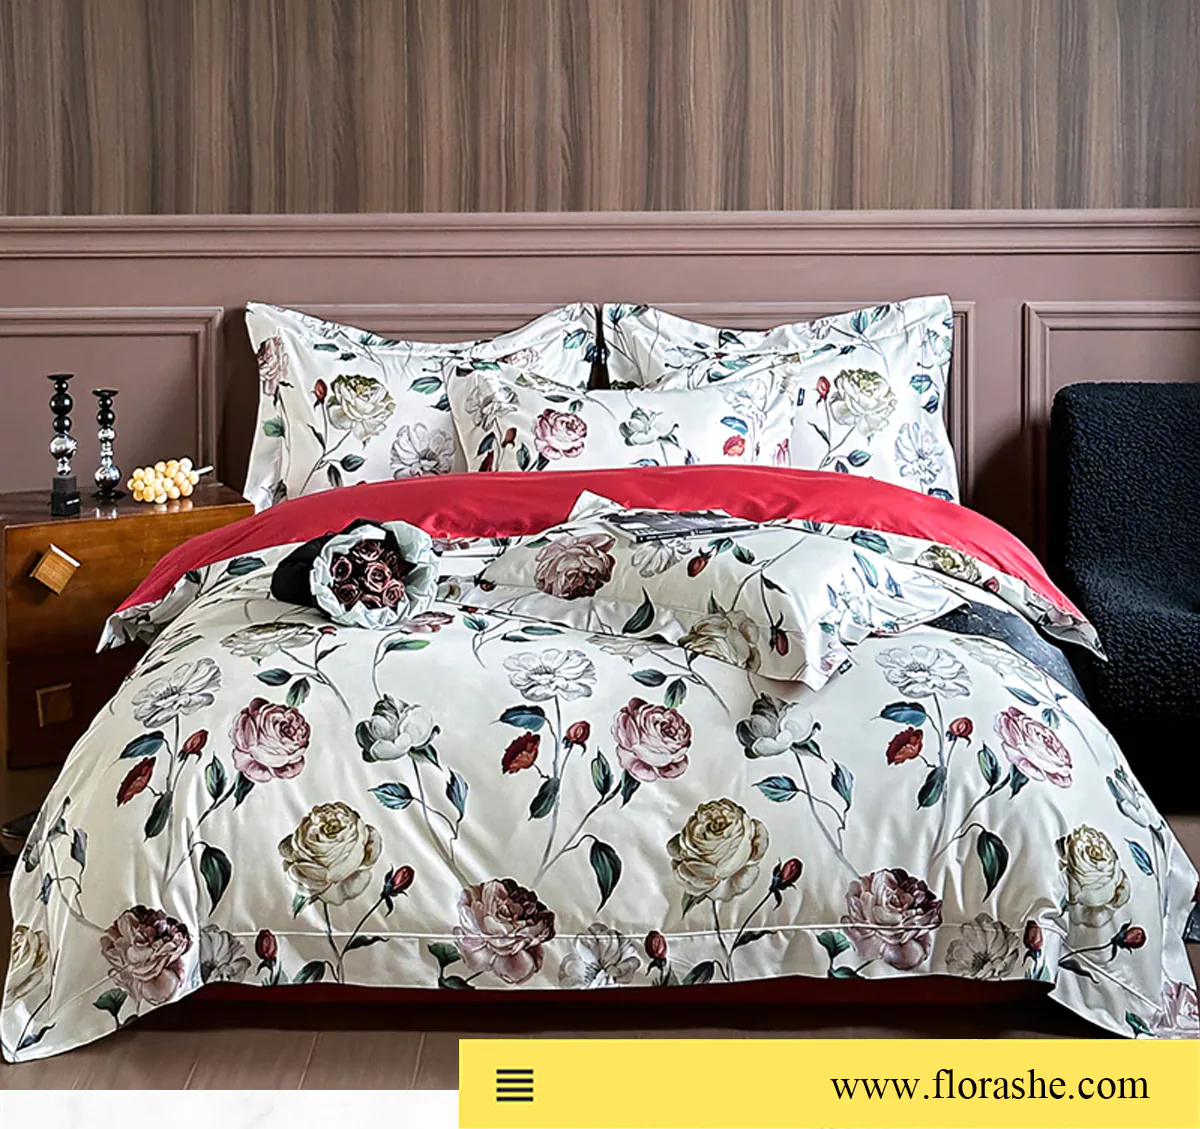 Aesthetic-100S-AB-Side-Floral-Print-Egyptian-Cotton-Bedding-Set20